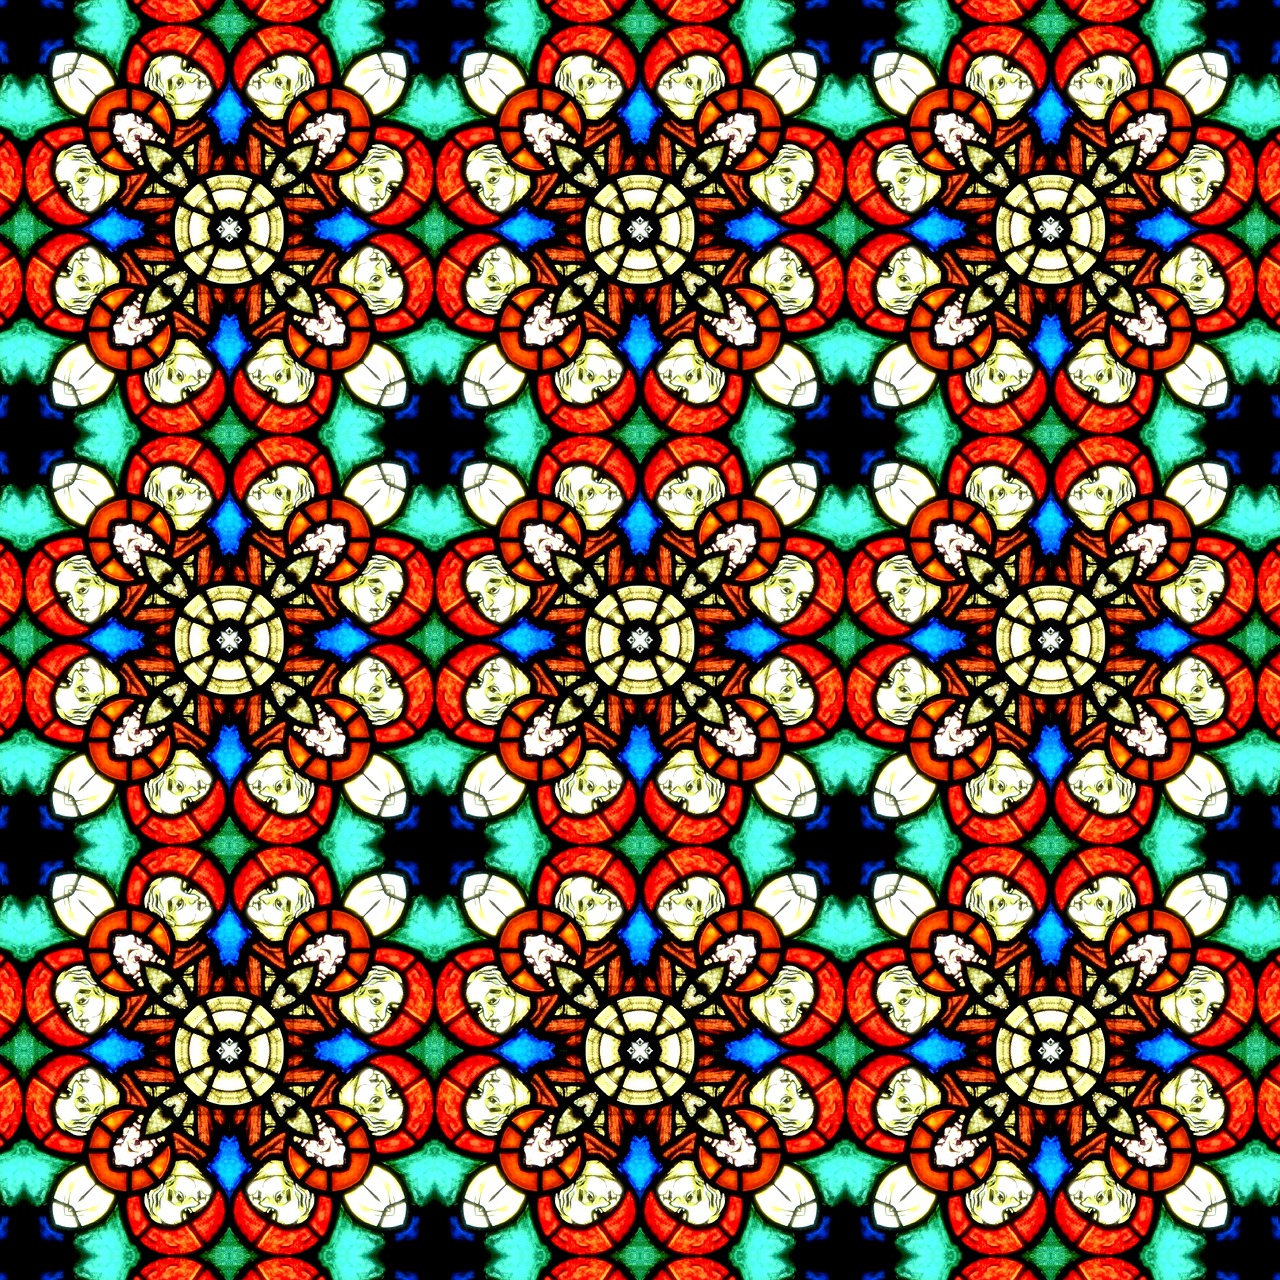 stained glass pattern texture free photo